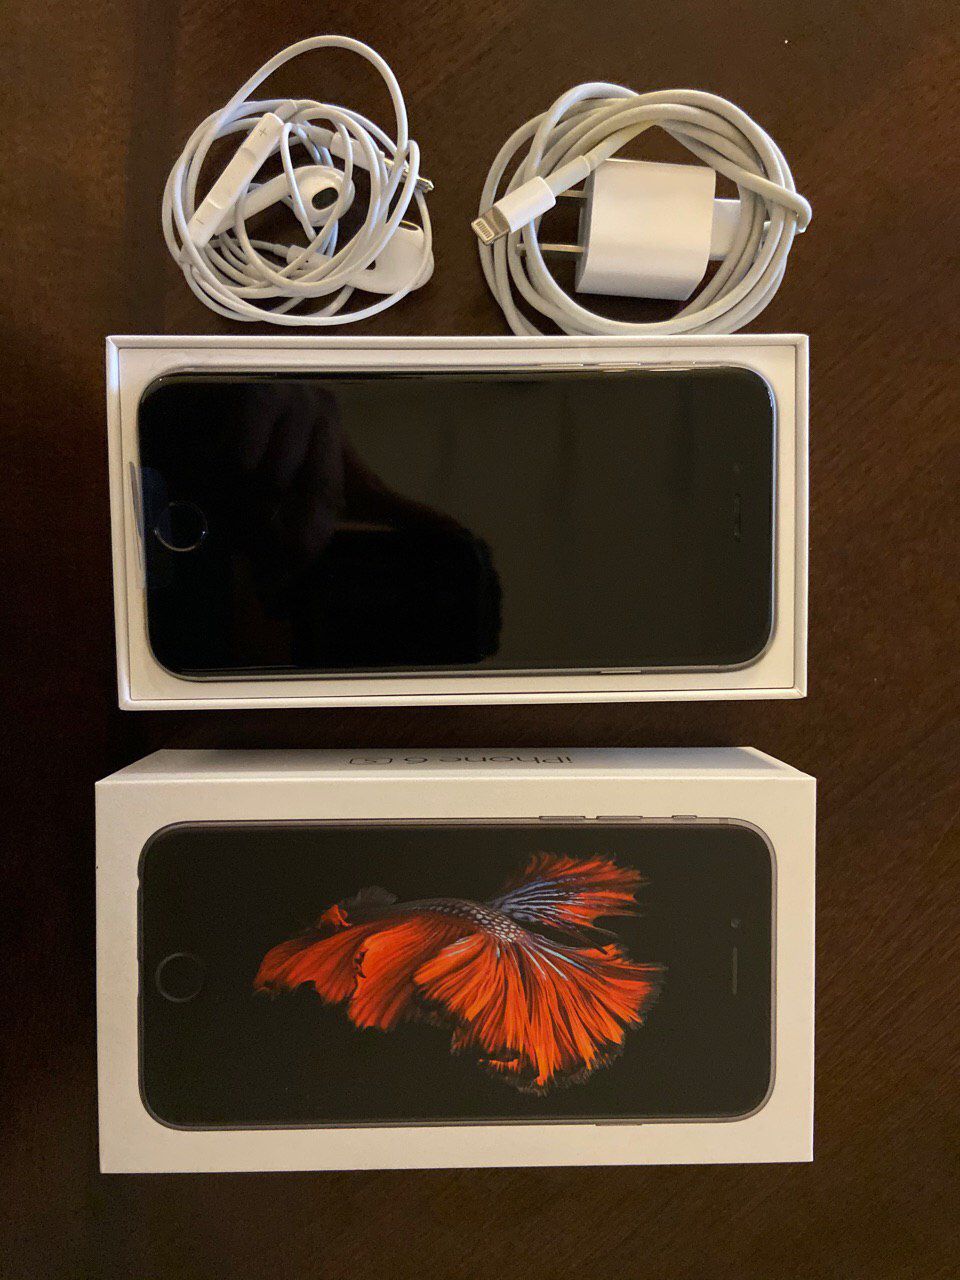 IPHONE 6S, 32 GB + CHARGER+ HEADSET+ BOX